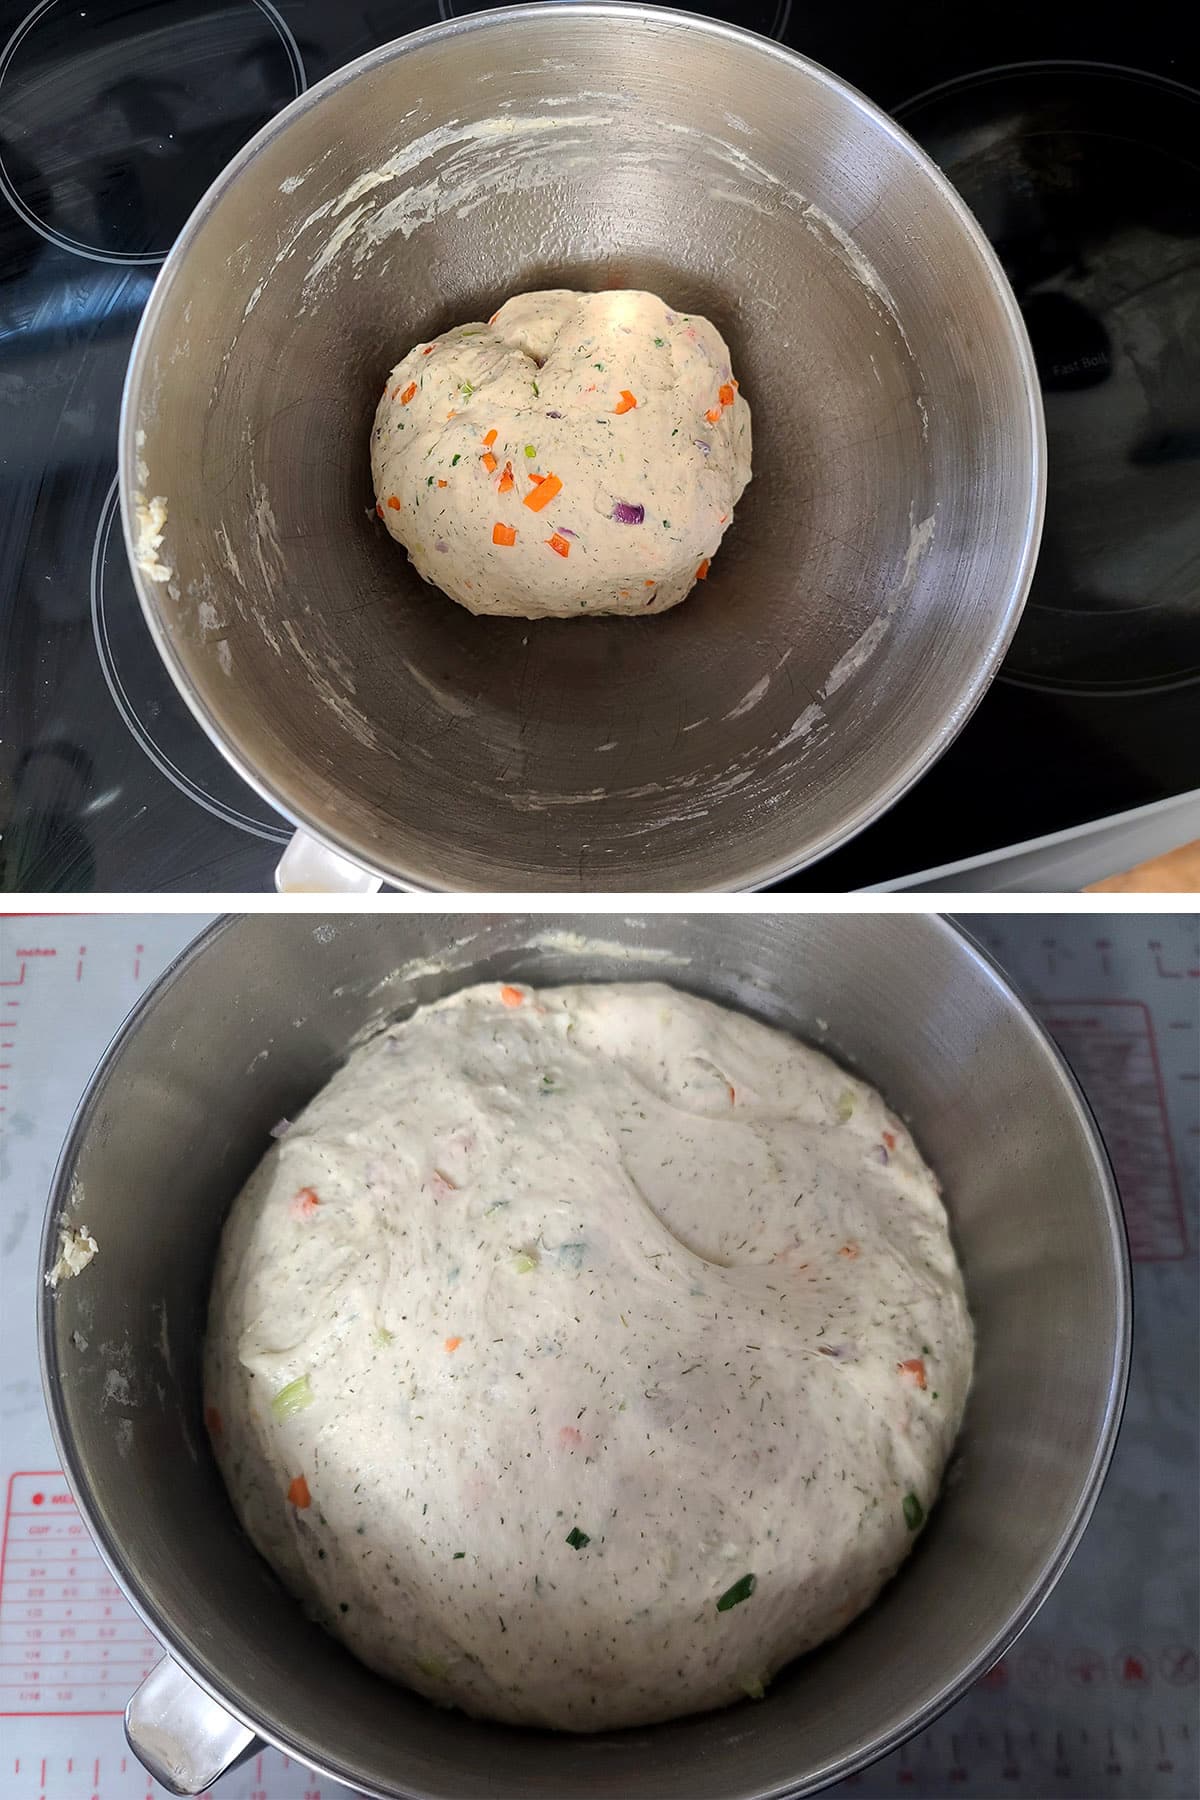 A 2 part image showing the bowl of dough, before and after the dough doubled in size.